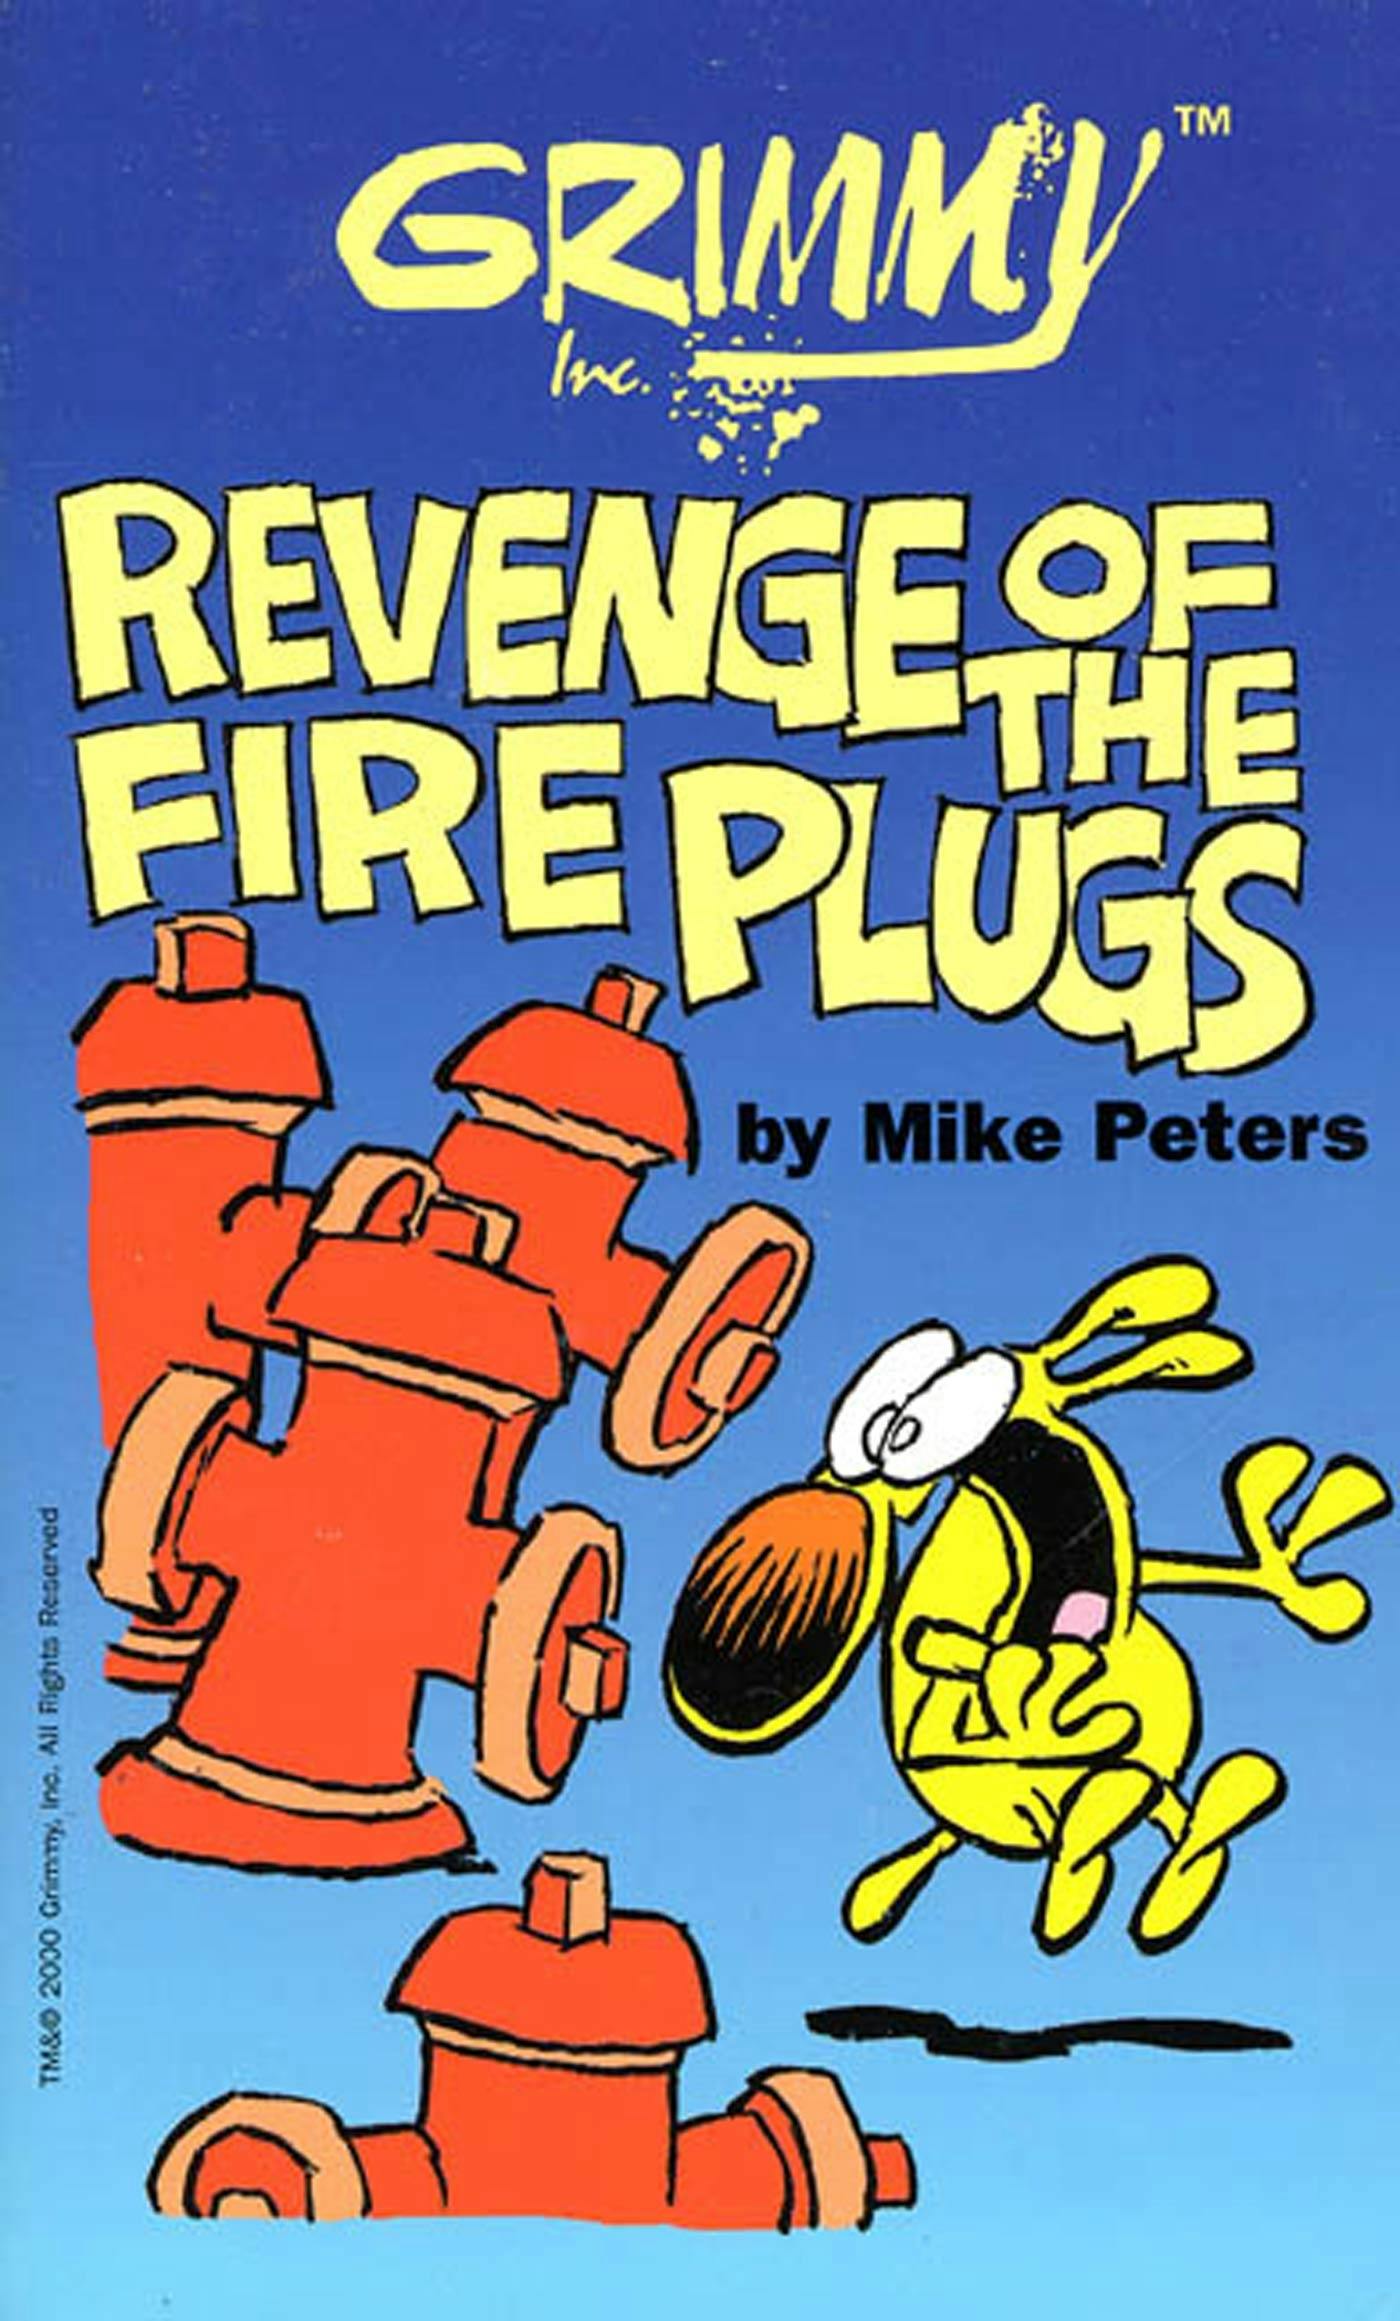 Cover for the book titled as: Grimmy: Revenge of the Fireplugs